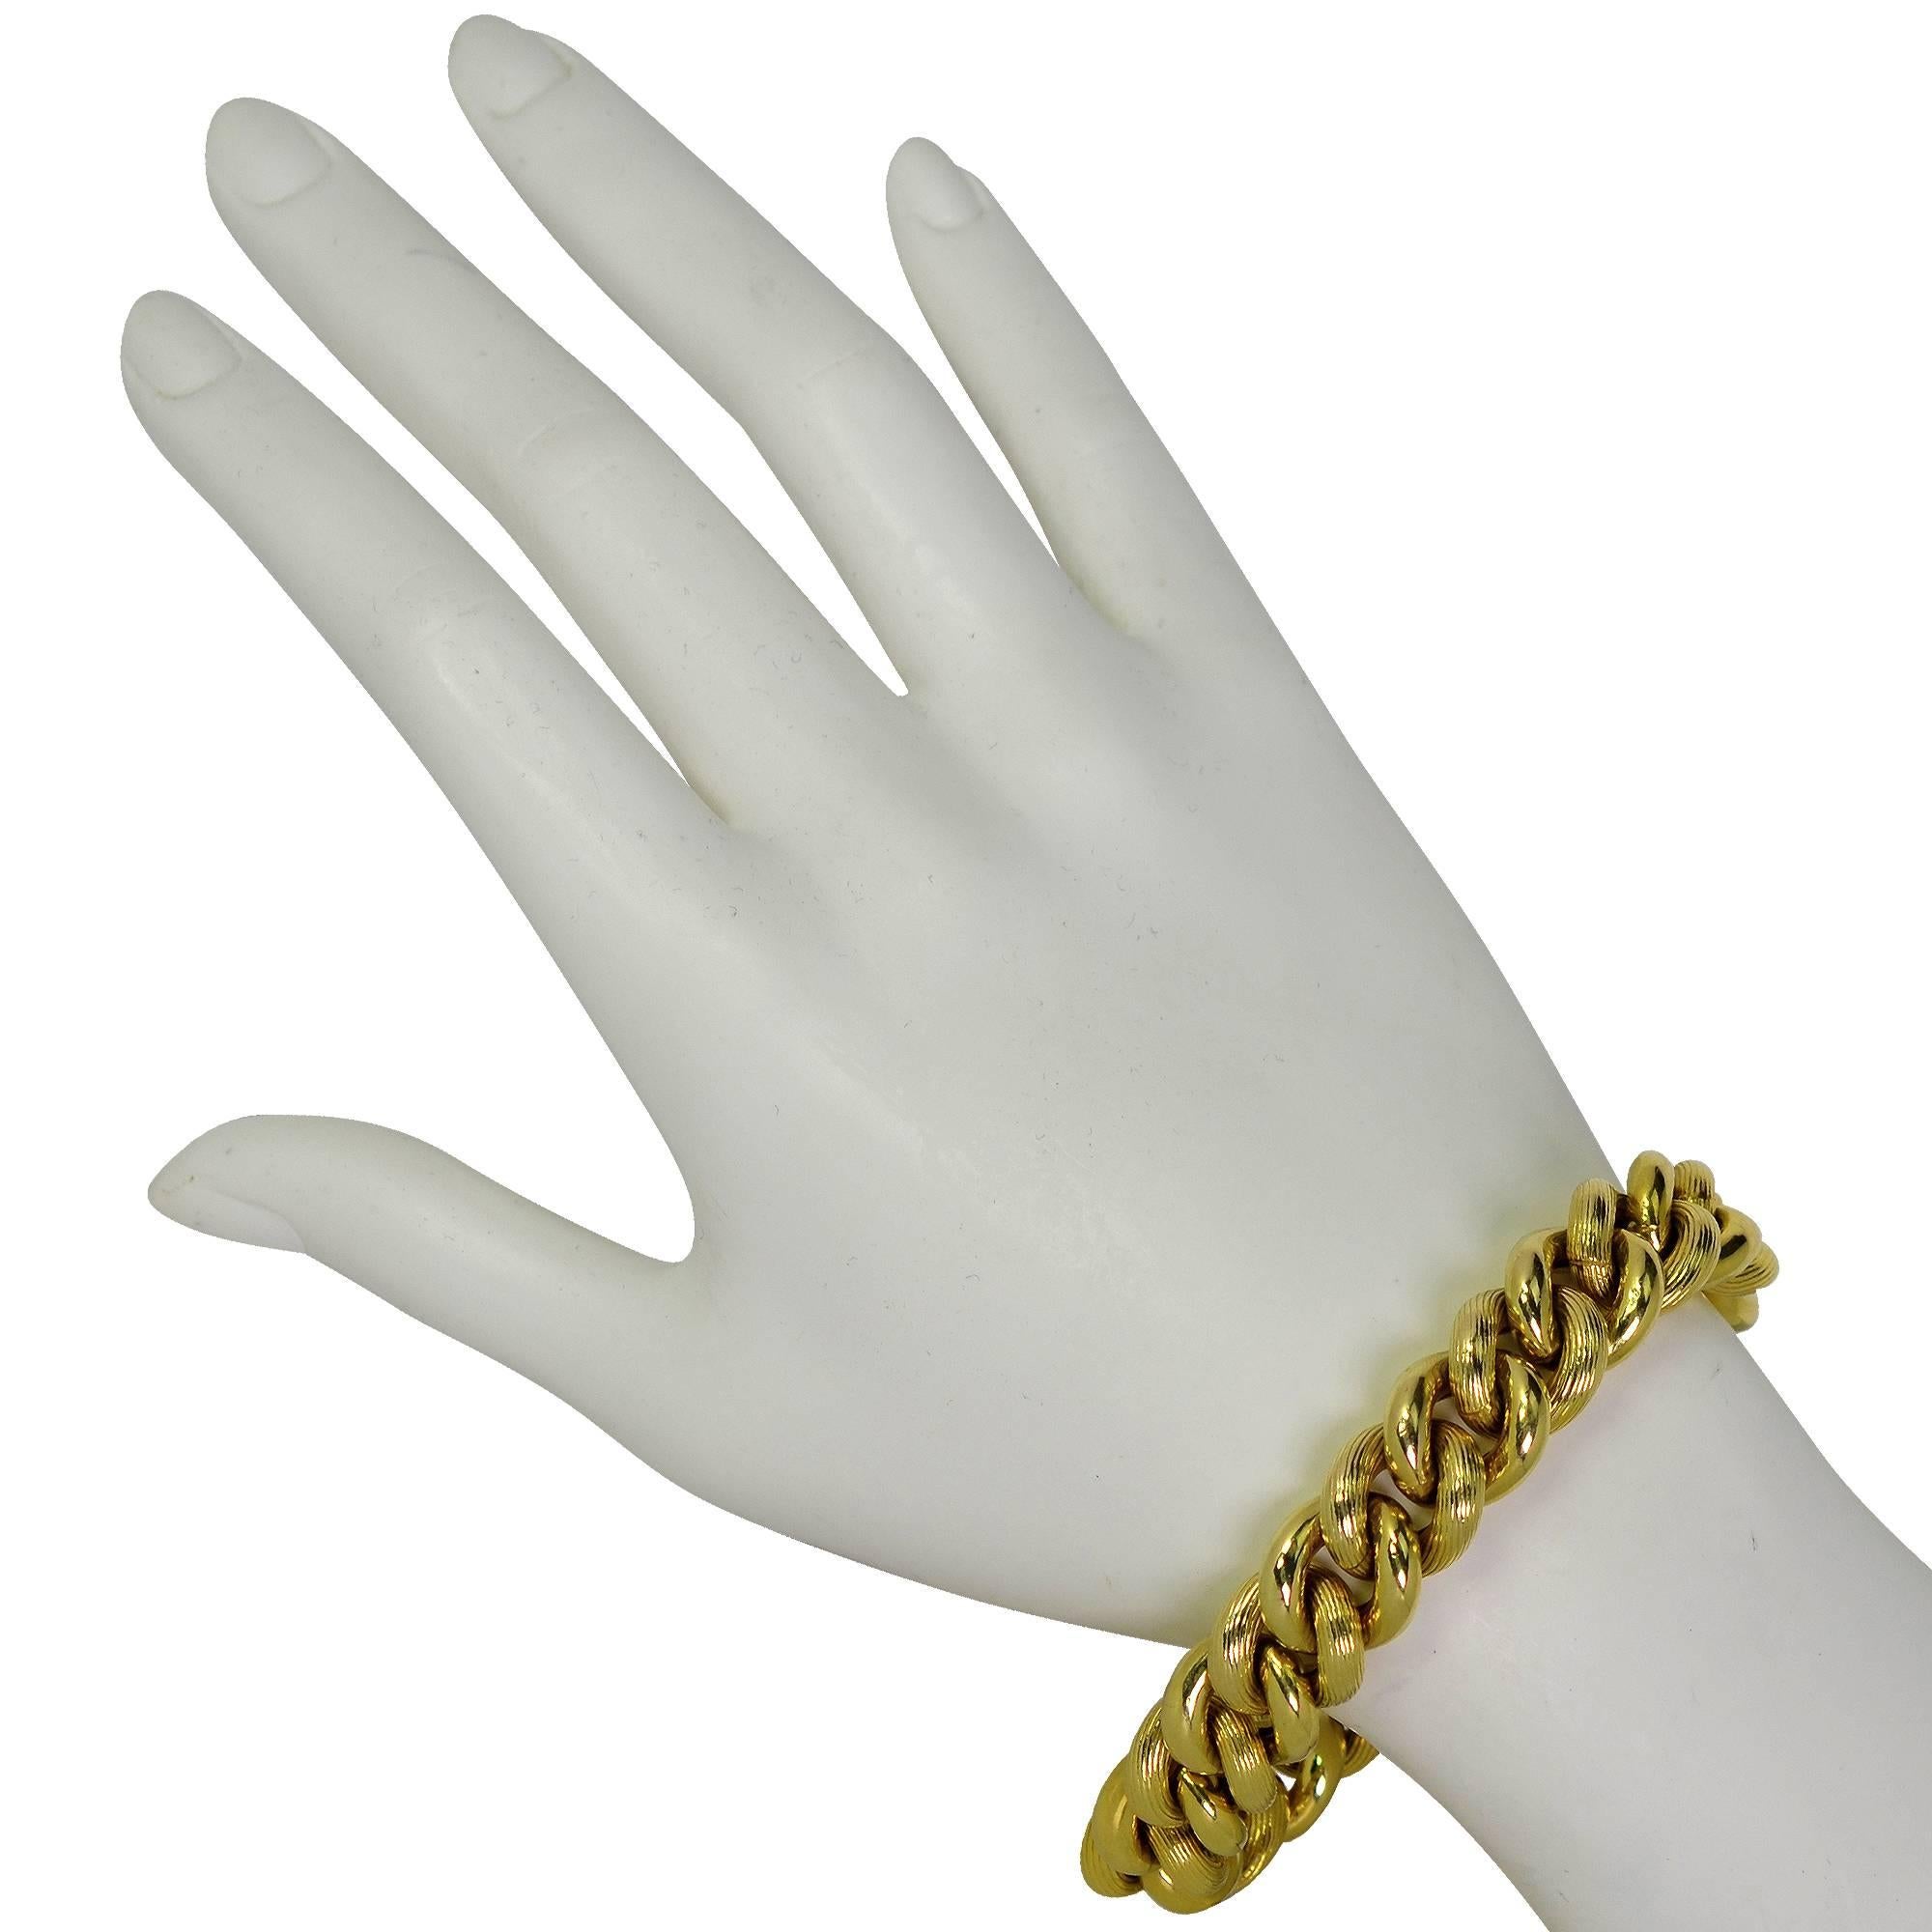 Italian 14k yellow gold Unoaerre bracelet featuring an alternating high polish and textured link design. 

This bracelet measures 7.75 inches in length by .60 inches wide.
It is stamped and/or tested as 14k gold.
The metal weight is 39.10